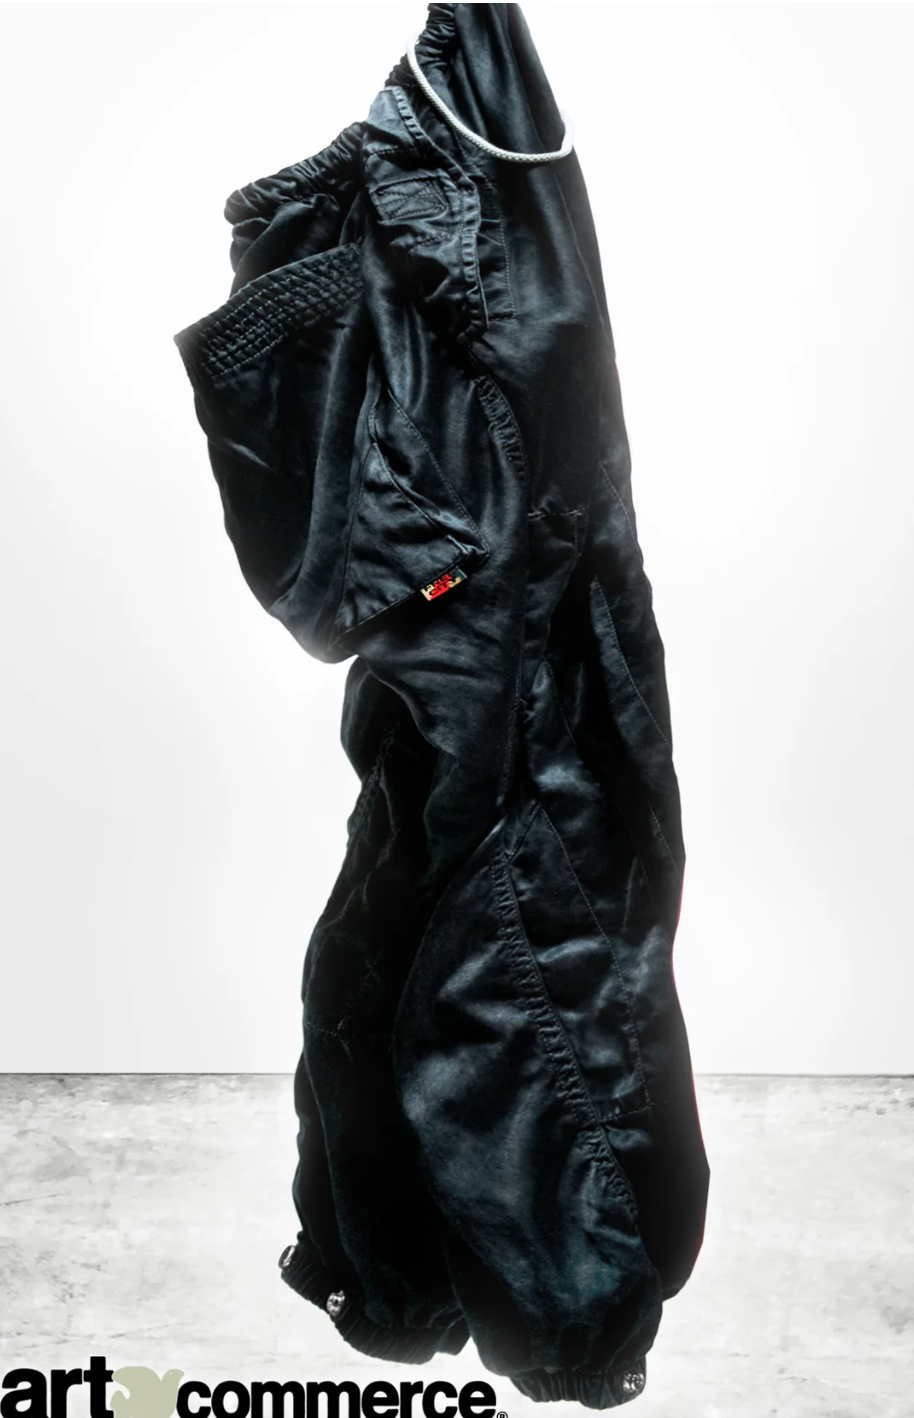 A puffy black winter coat stands upright on its own, seemingly filled with air. The coat&#39;s textural details and a small red tag marked &quot;MADE IN USA&quot; are visible against a white background.